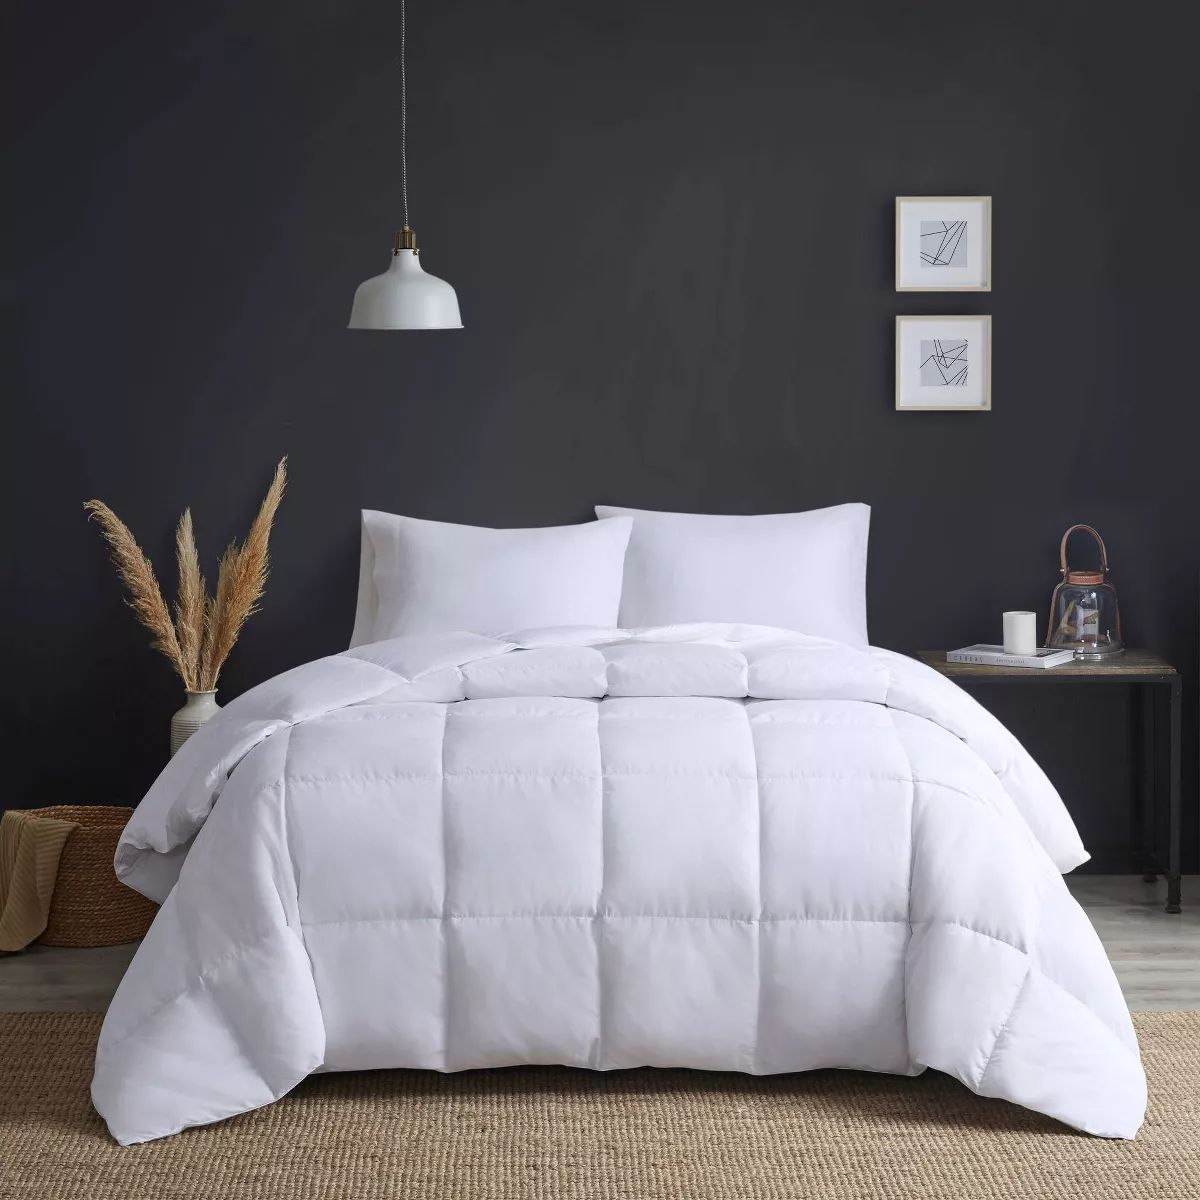 Heavy Warmth Goose Feather and Down Oversize Duvet Comforter Insert | Target